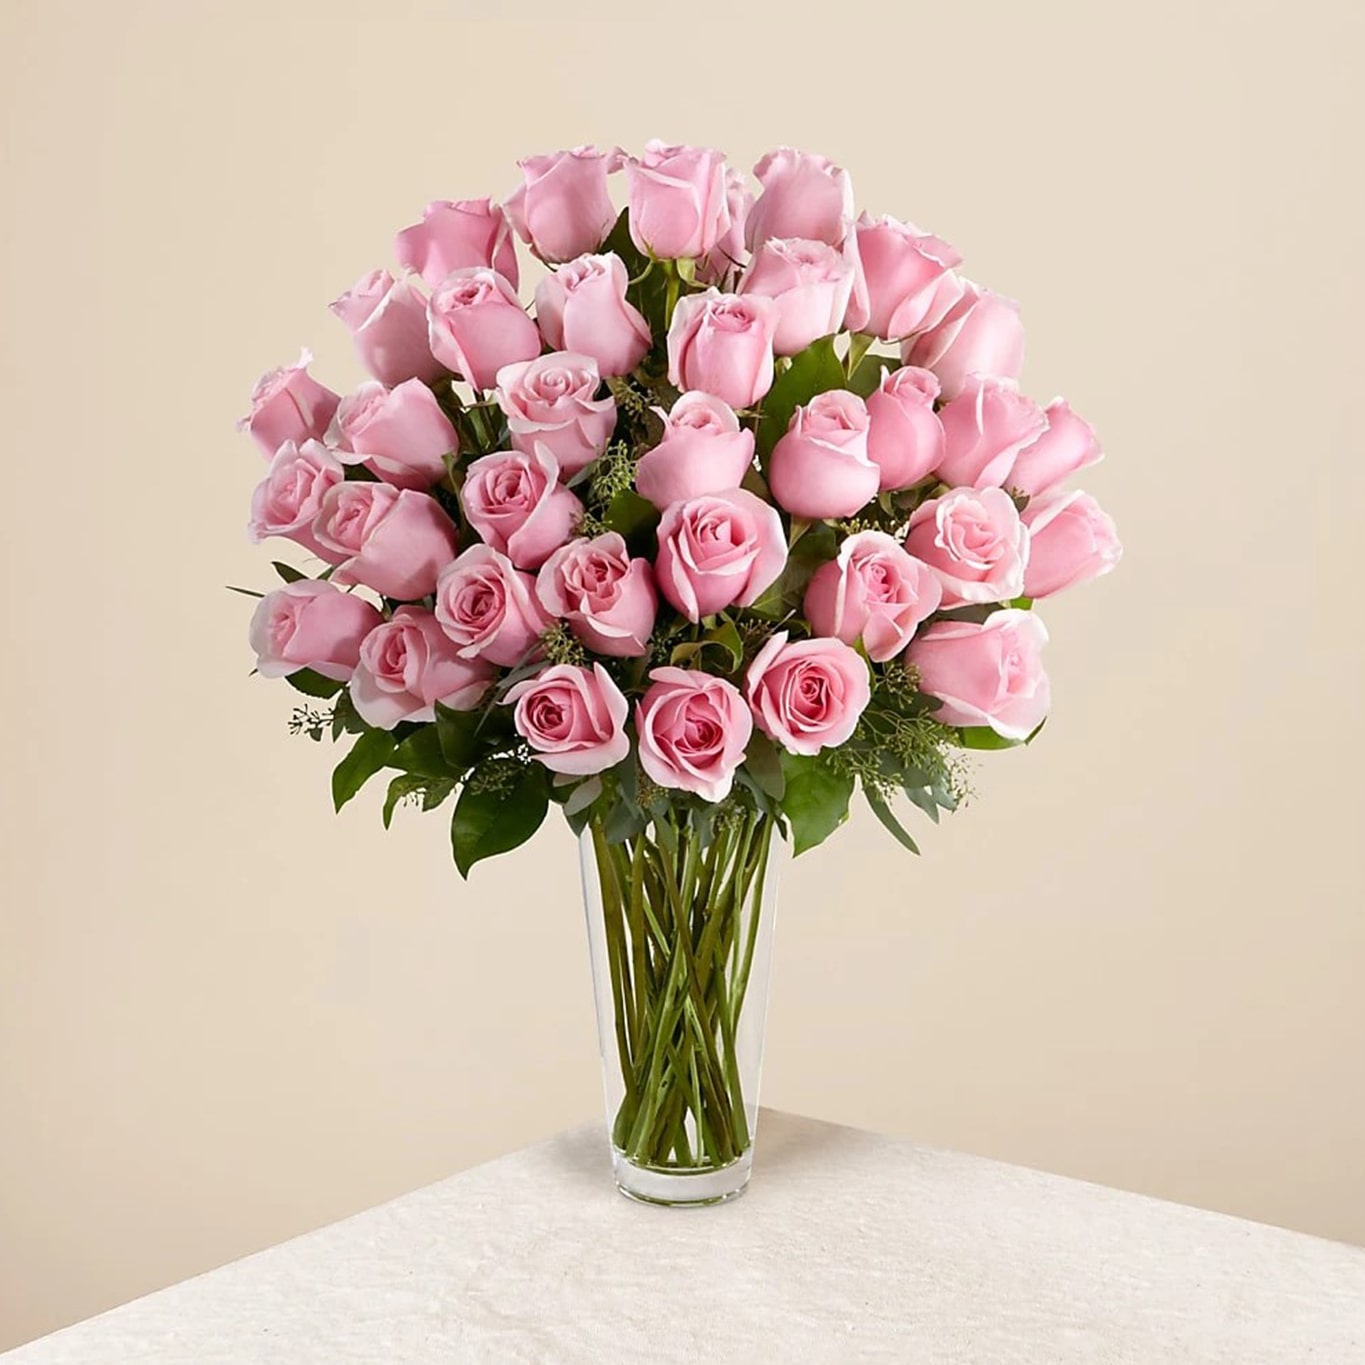 Pink Roses Bouquet or Vase, flowers for home decoration with pink roses, it is a beautiful gift for anniversary, flower gift for birthday, flowers for all occasions and decoration, Fresh Flowers Orlando.